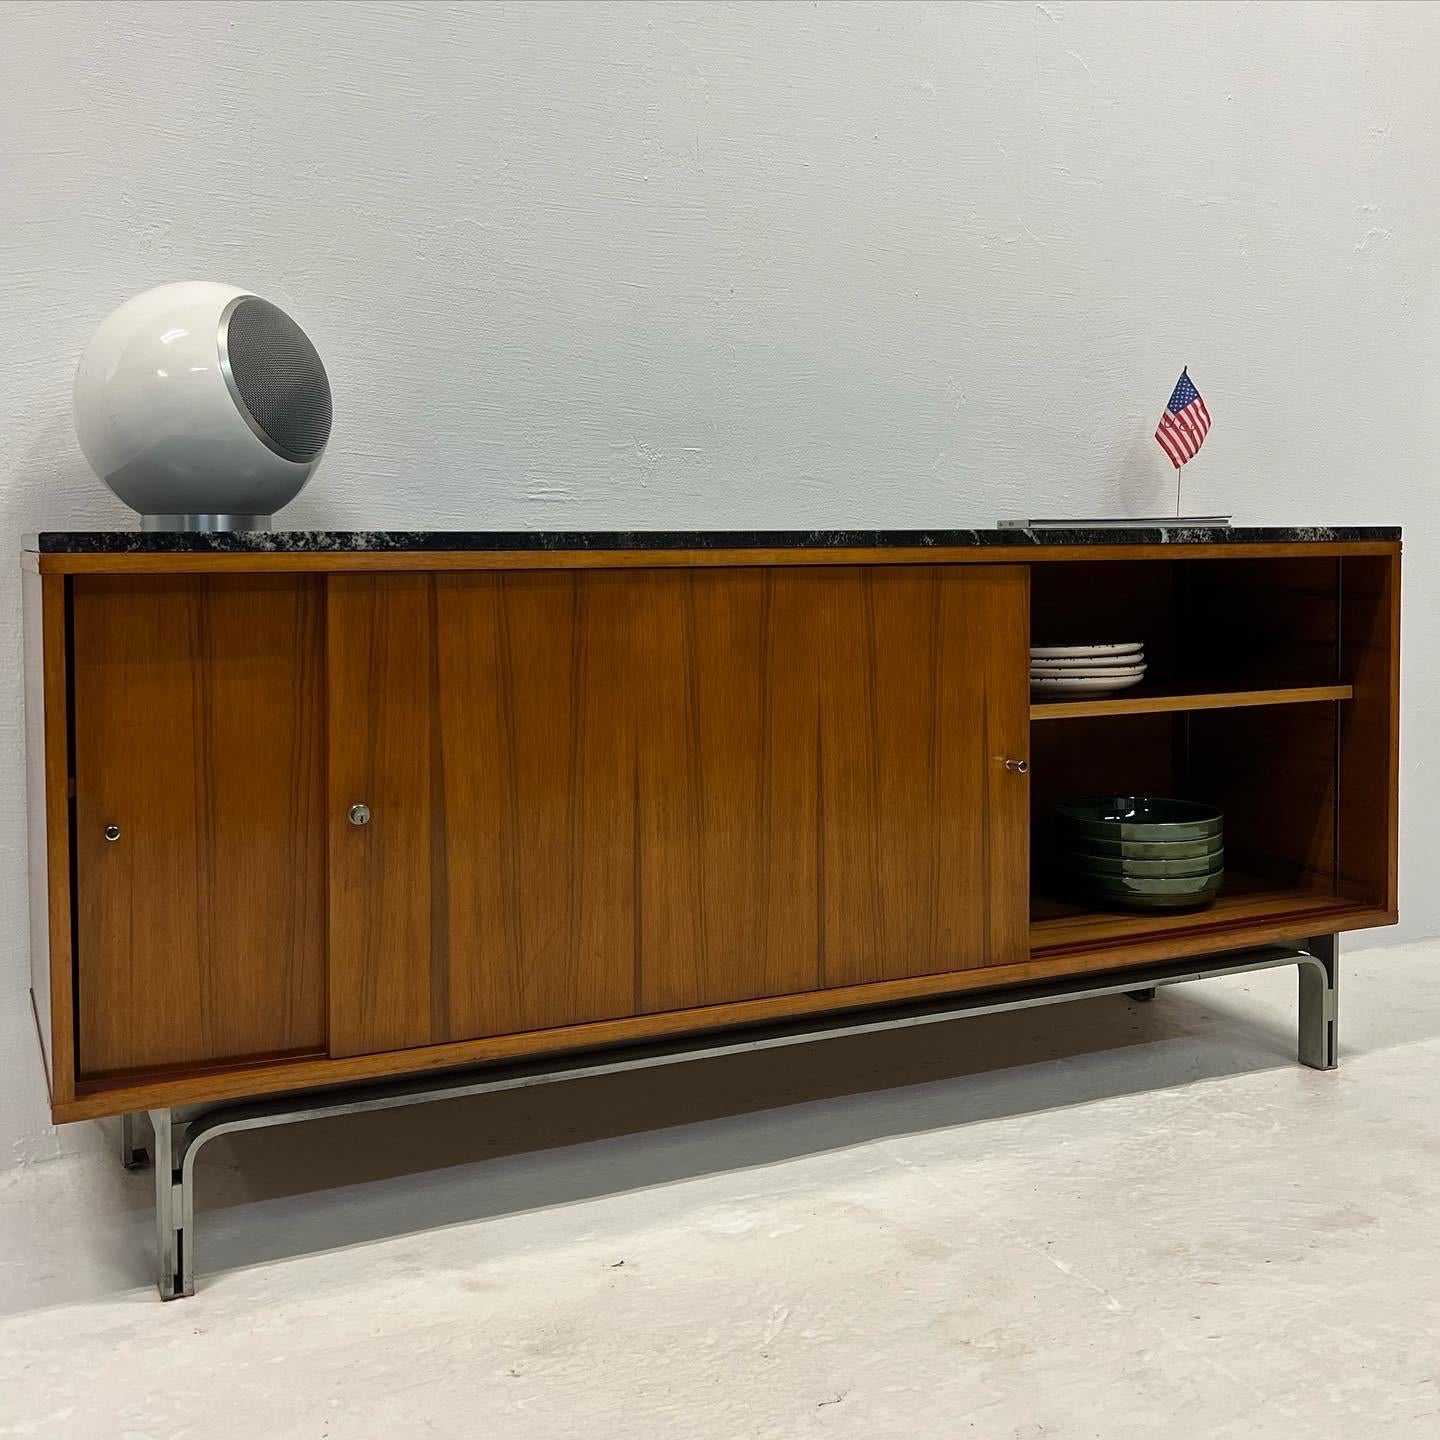 Large 1970s sideboard in oak, cast aluminum base and black granite top. DLG Florence Knoll, Georges Frydman. Very stable and solid, in good vintage condition. The granite top is new.